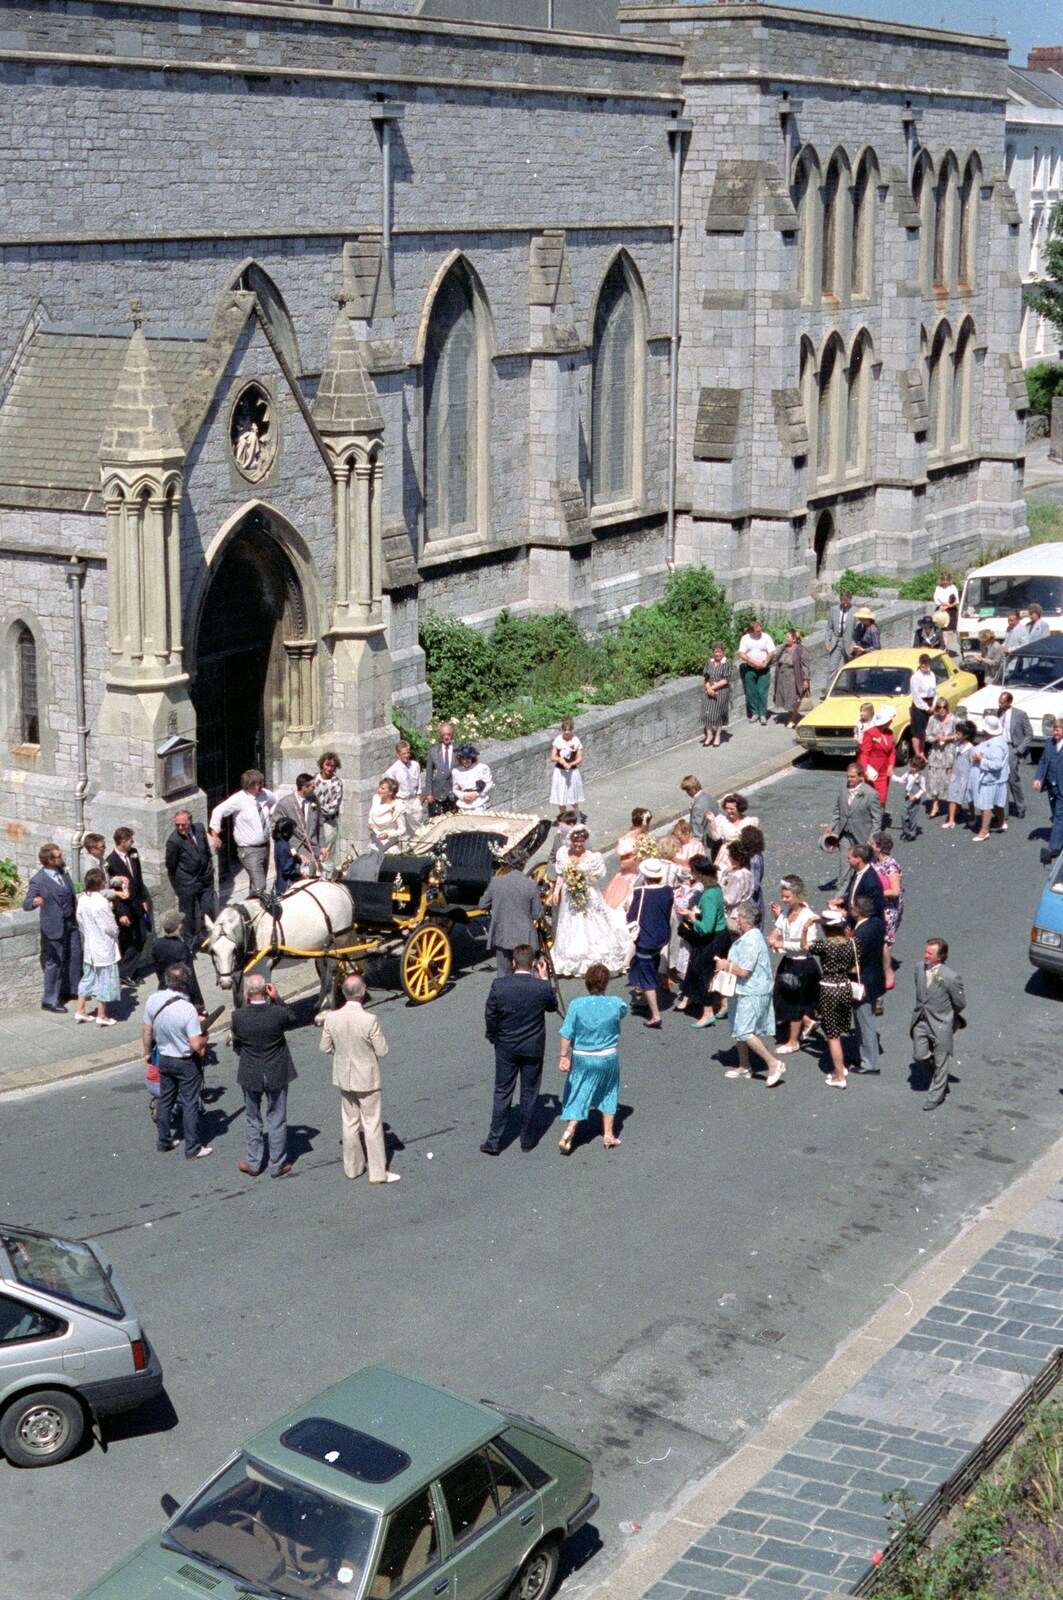 Uni: Risky Business, A Wedding Occurs and Dave Leaves, Wyndham Square, Plymouth - 15th July 1989: Milling around outside St. Peter's